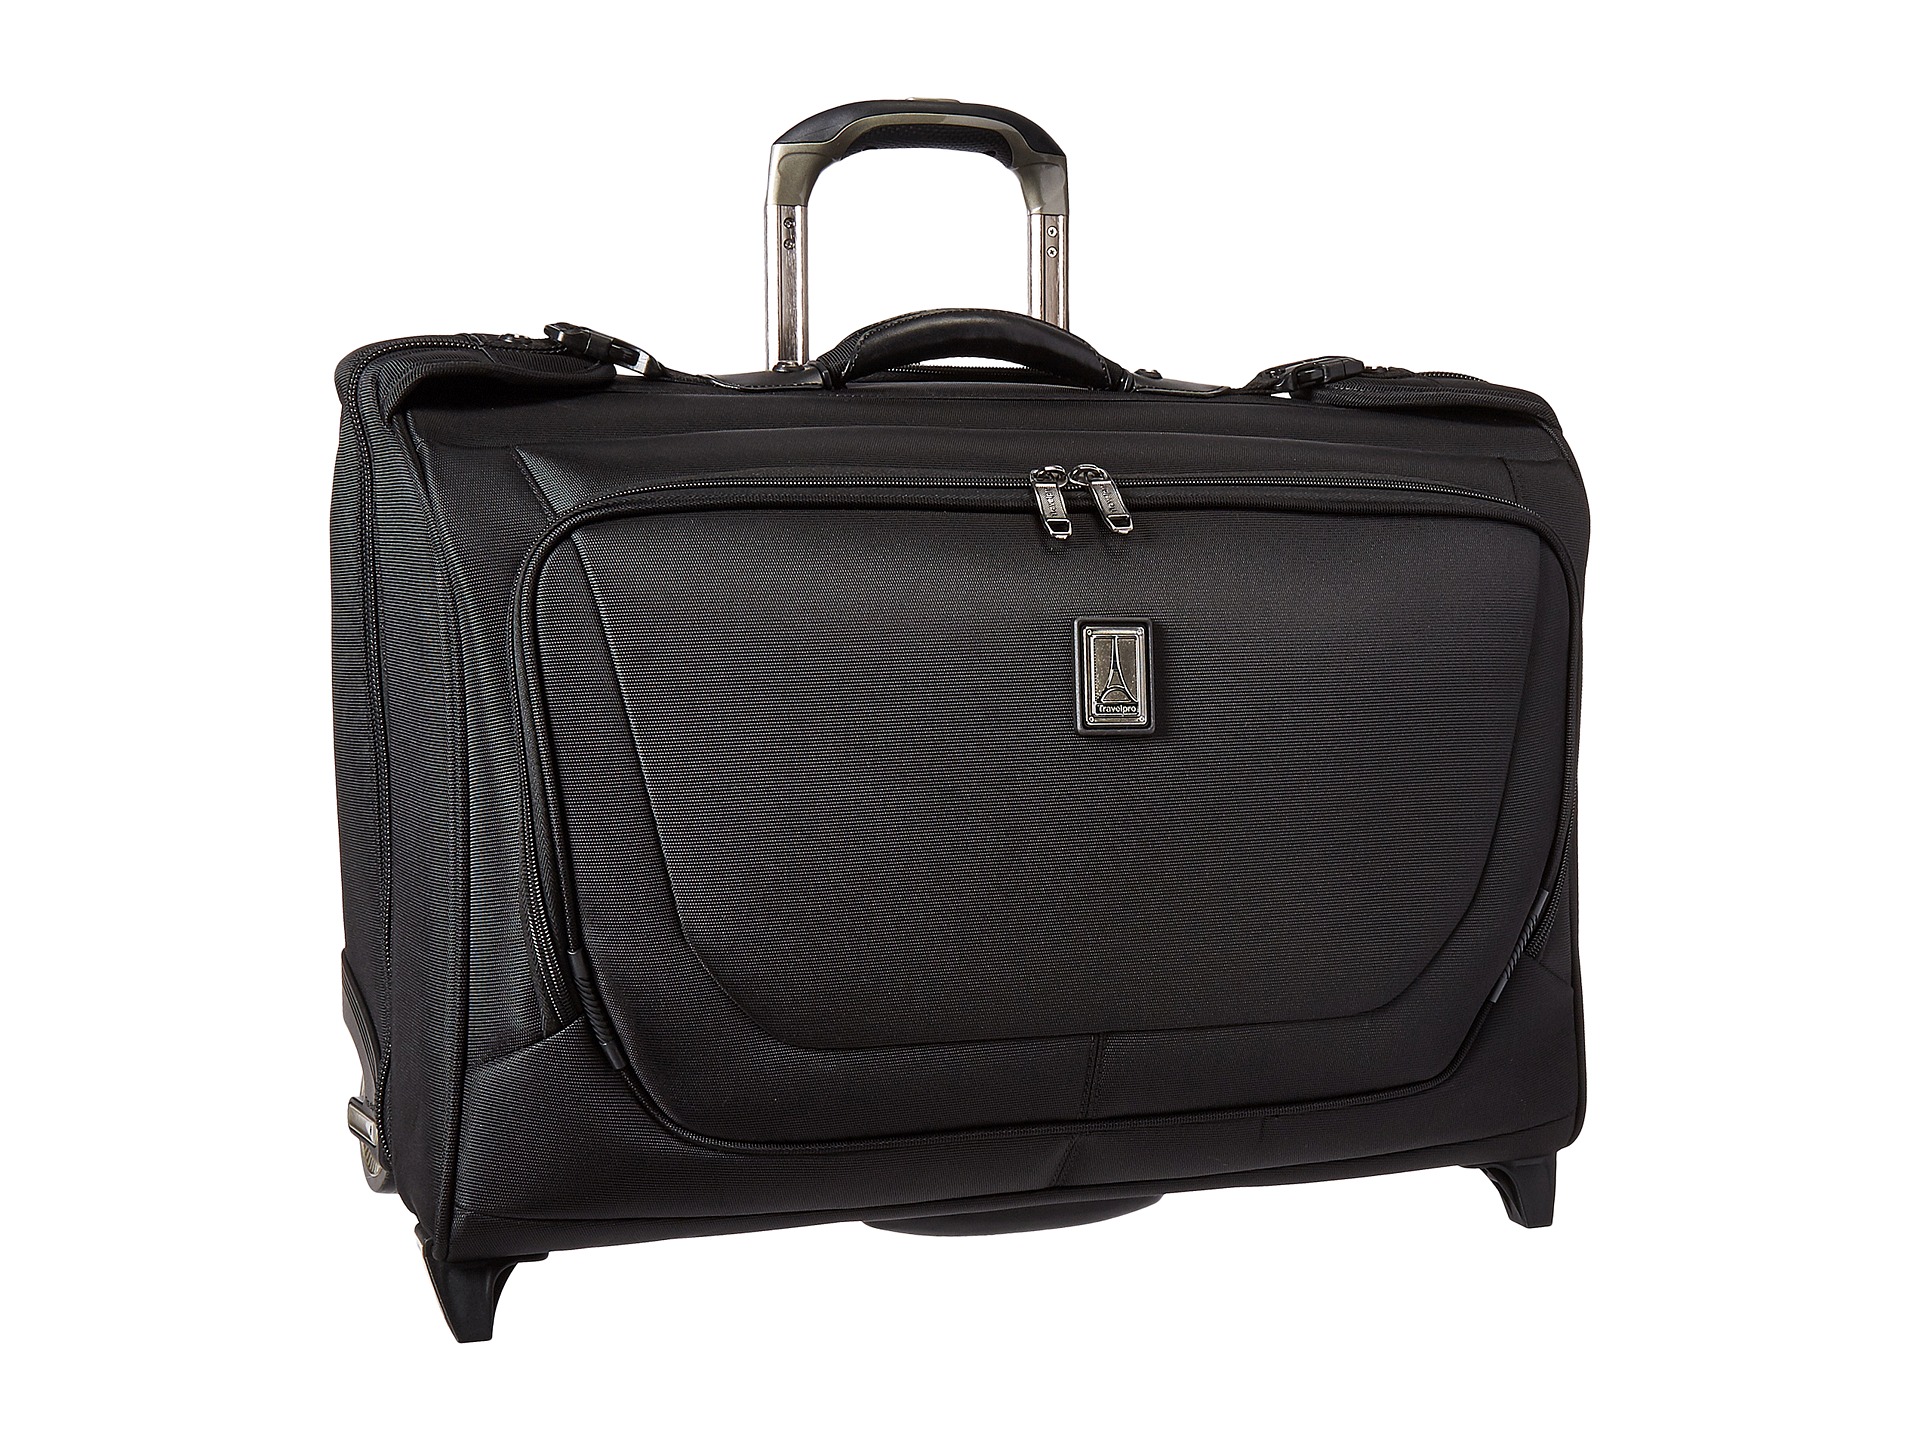 Travelpro Crew 11 - Carry-On Rolling Garment Bag - www.neverfullmm.com Free Shipping BOTH Ways